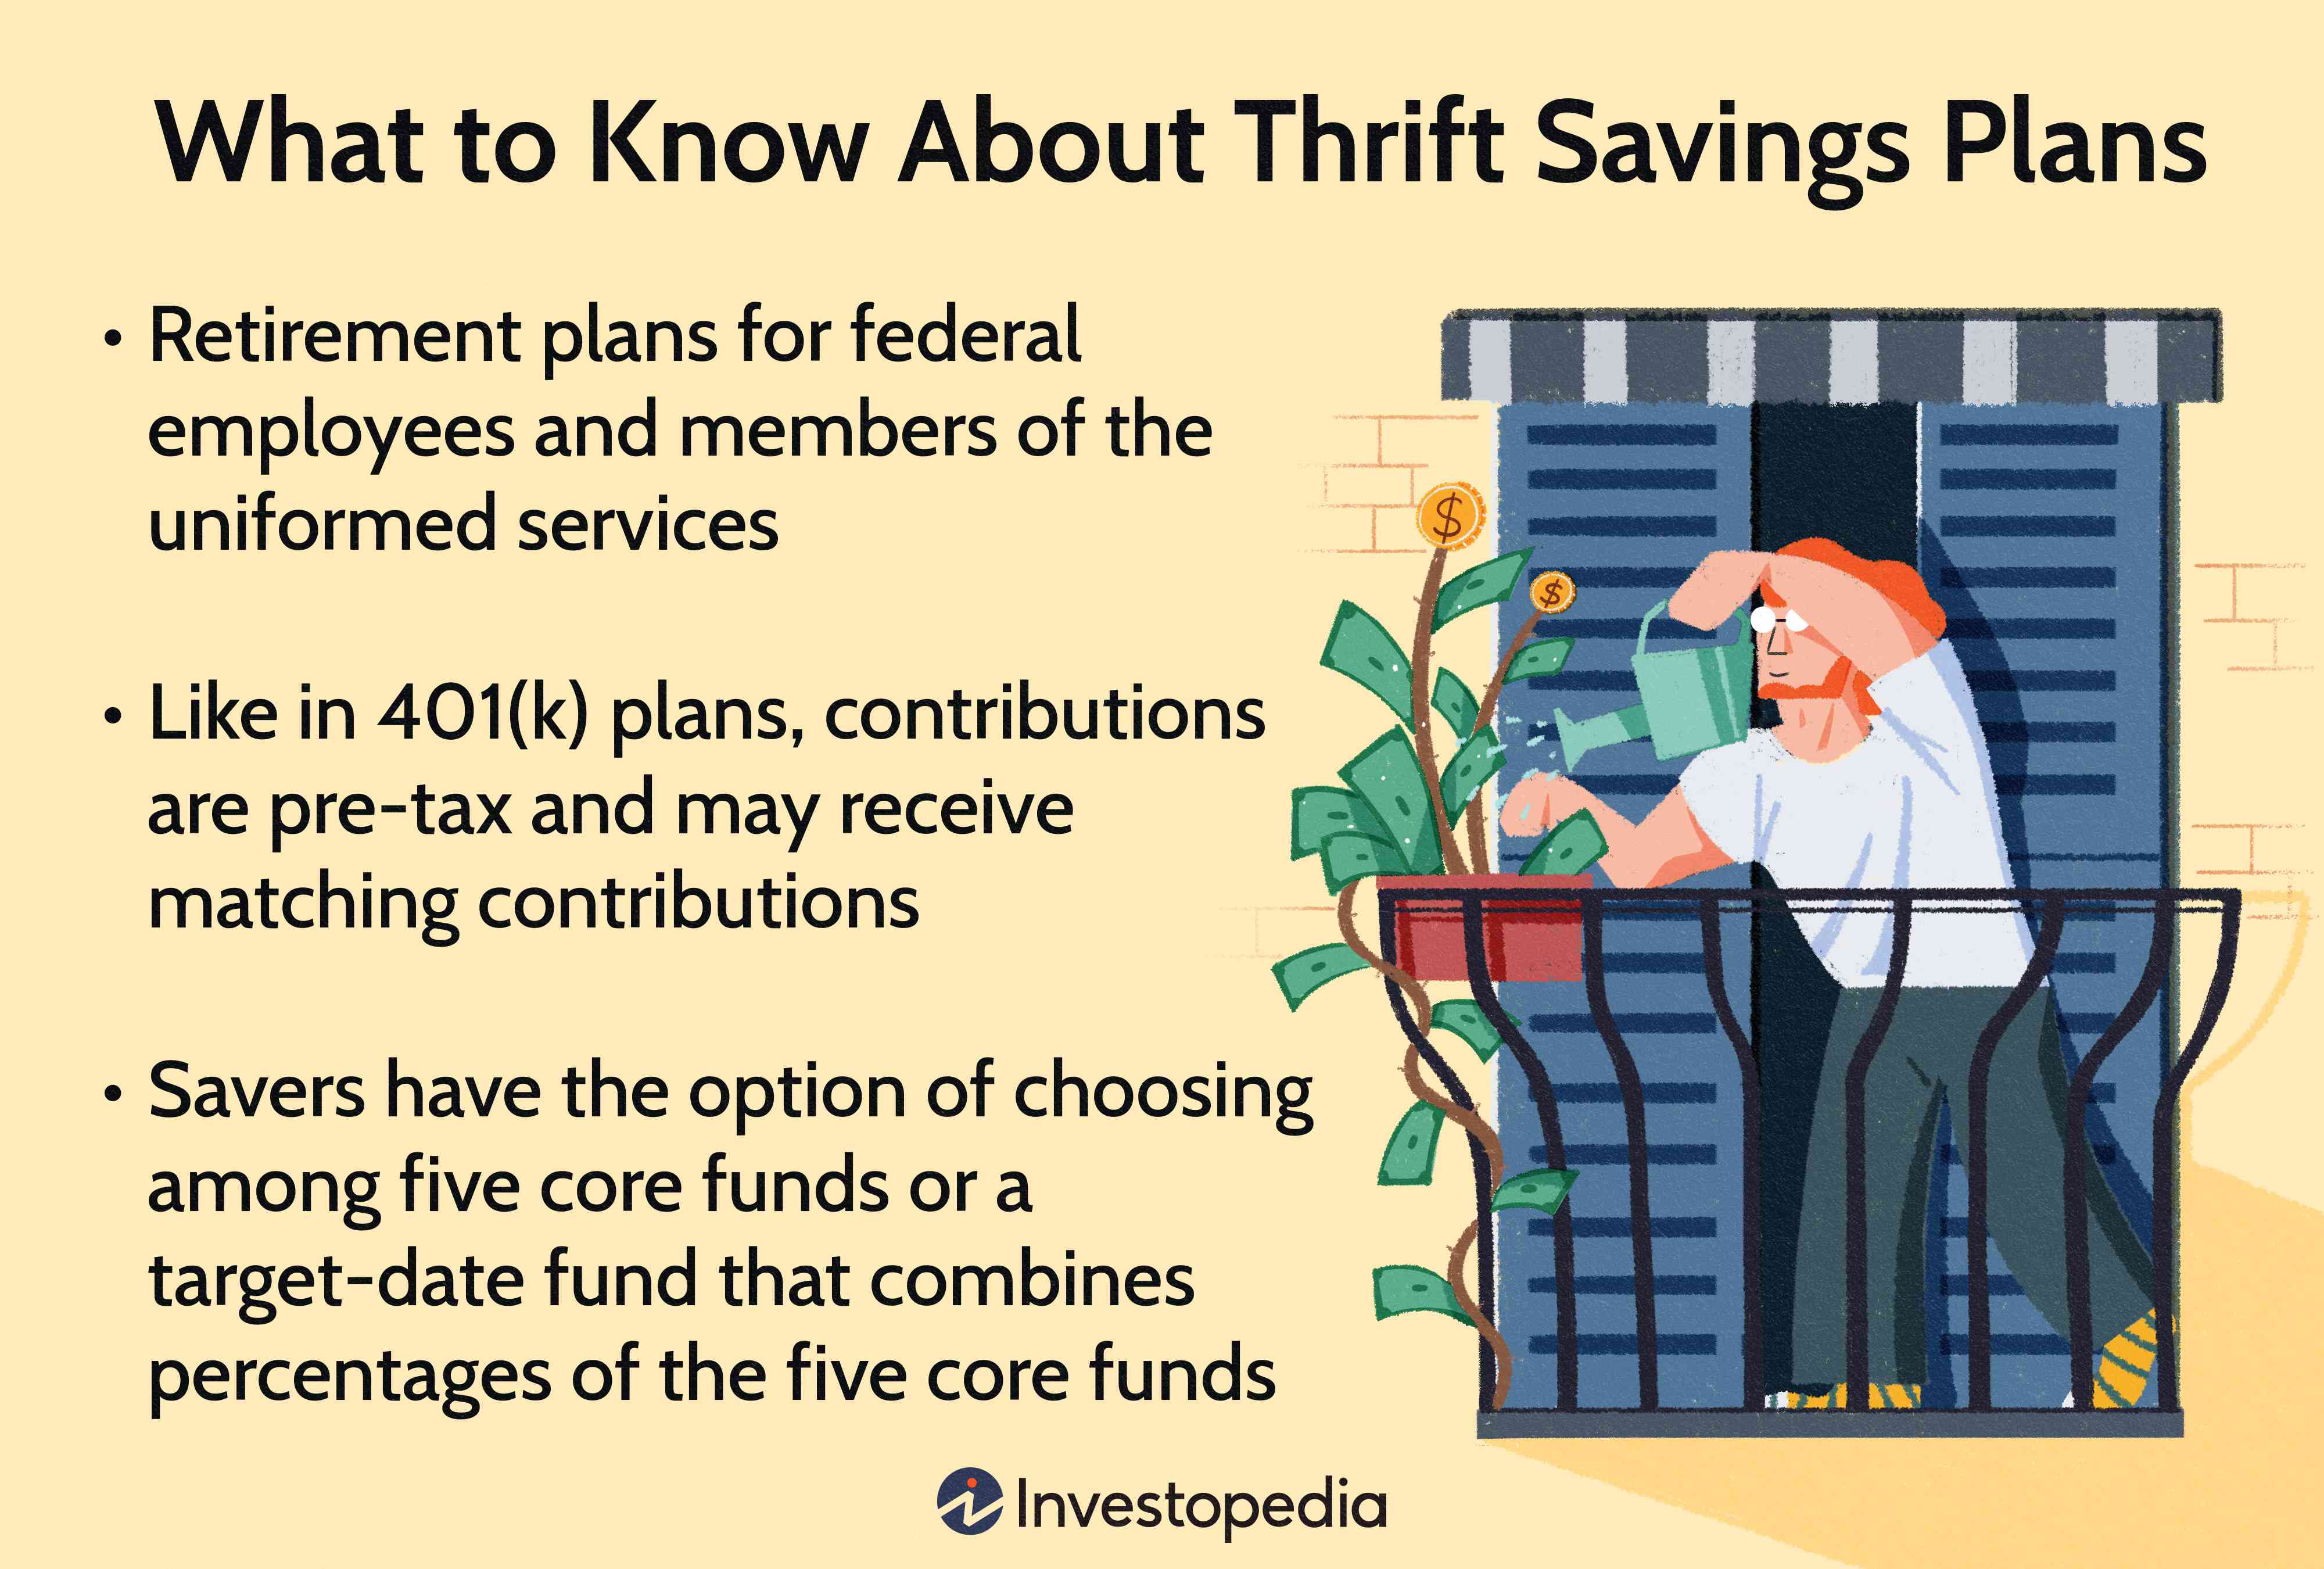 What to Know About Thrift Savings Plans